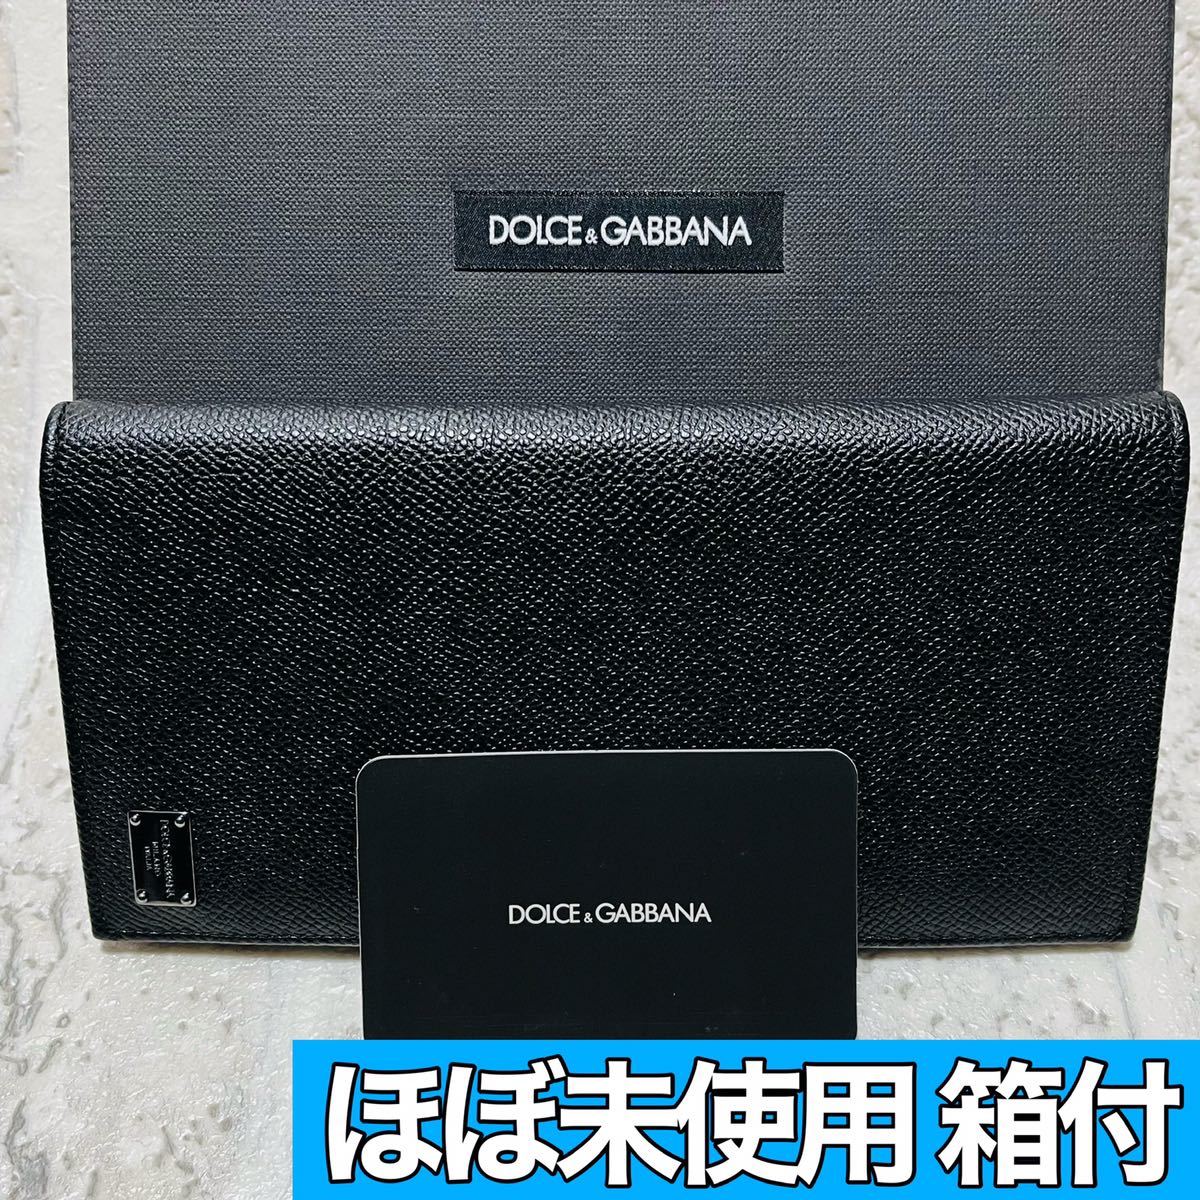  almost unused beautiful goods Dolce & Gabbana long wallet long wallet black men's lady's unisex original leather Italy made 8629